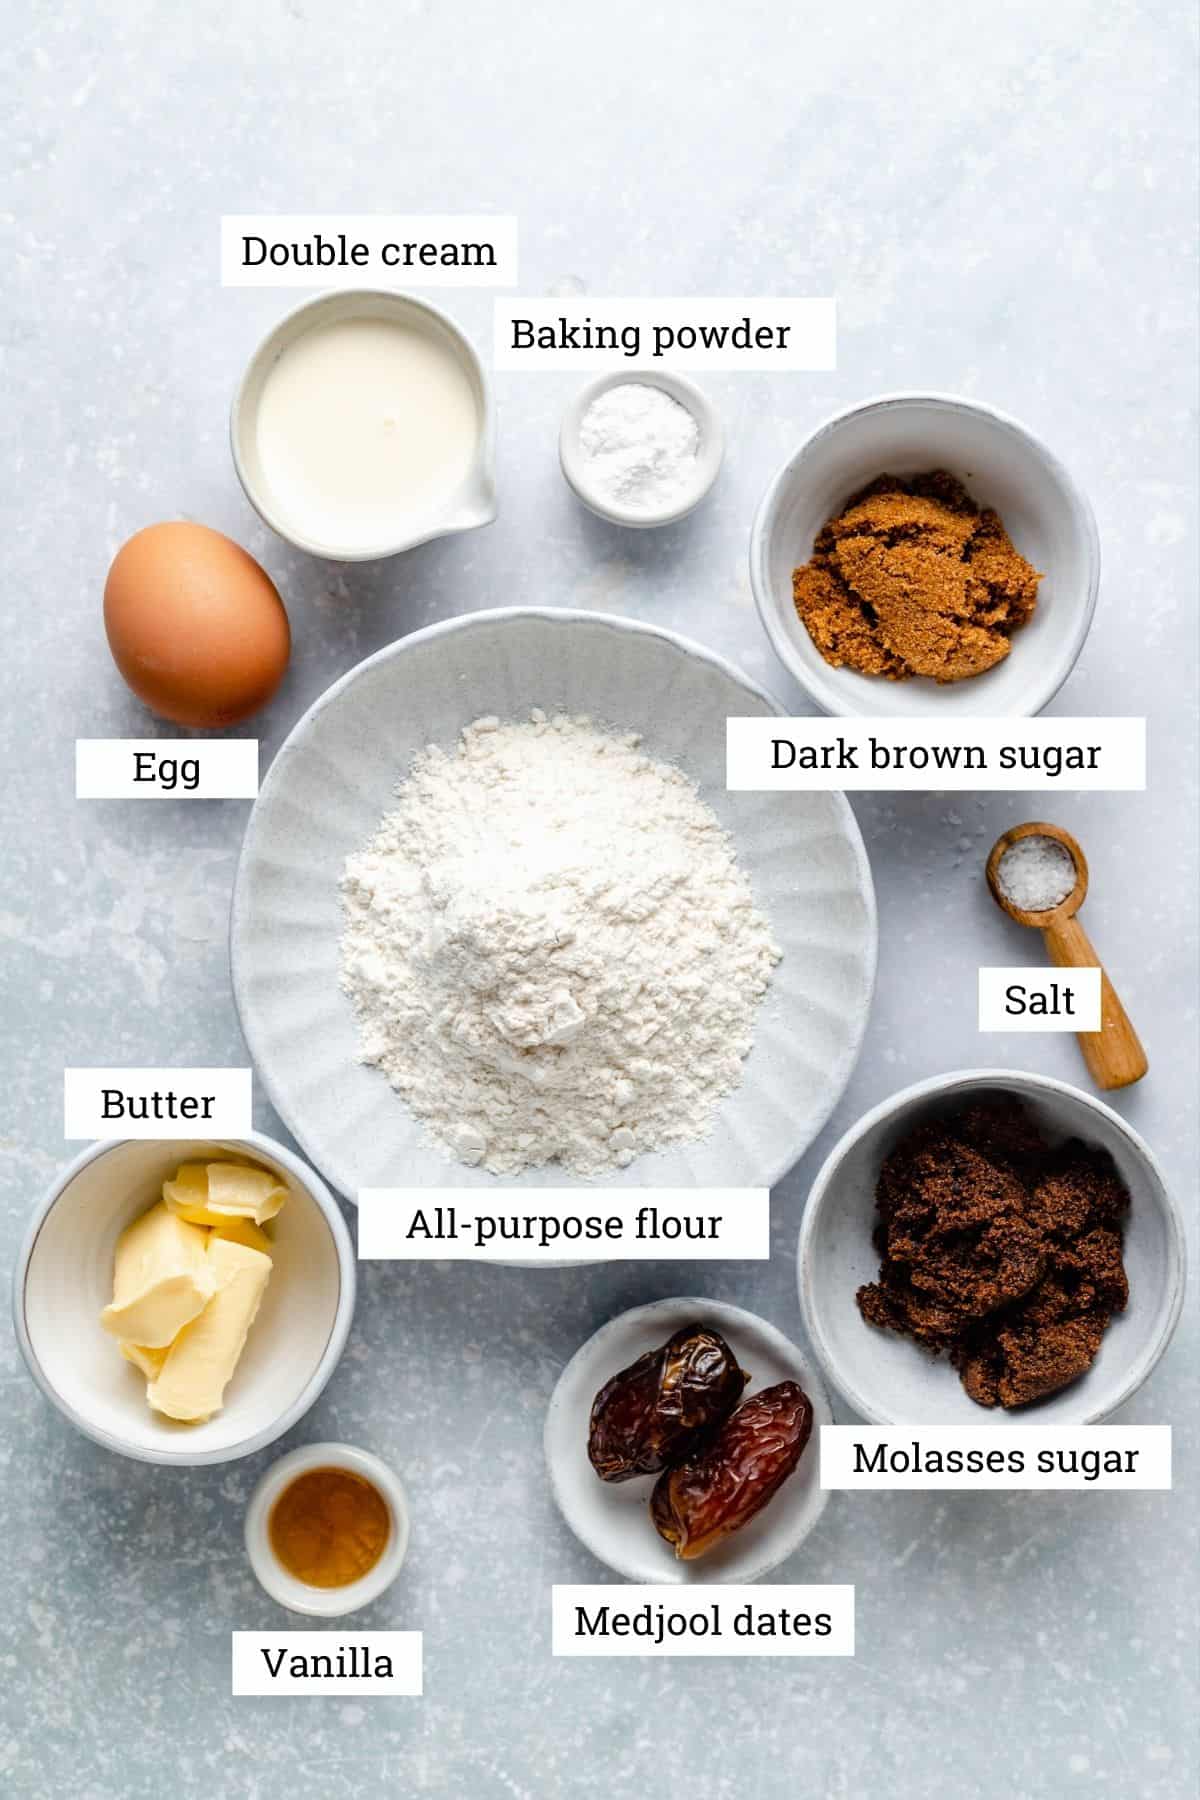 Ingredients for the sticky toffee mug cake in bowls: flour, sugar, cream, butter, egg, medjool dates, vanilla and baking powder.